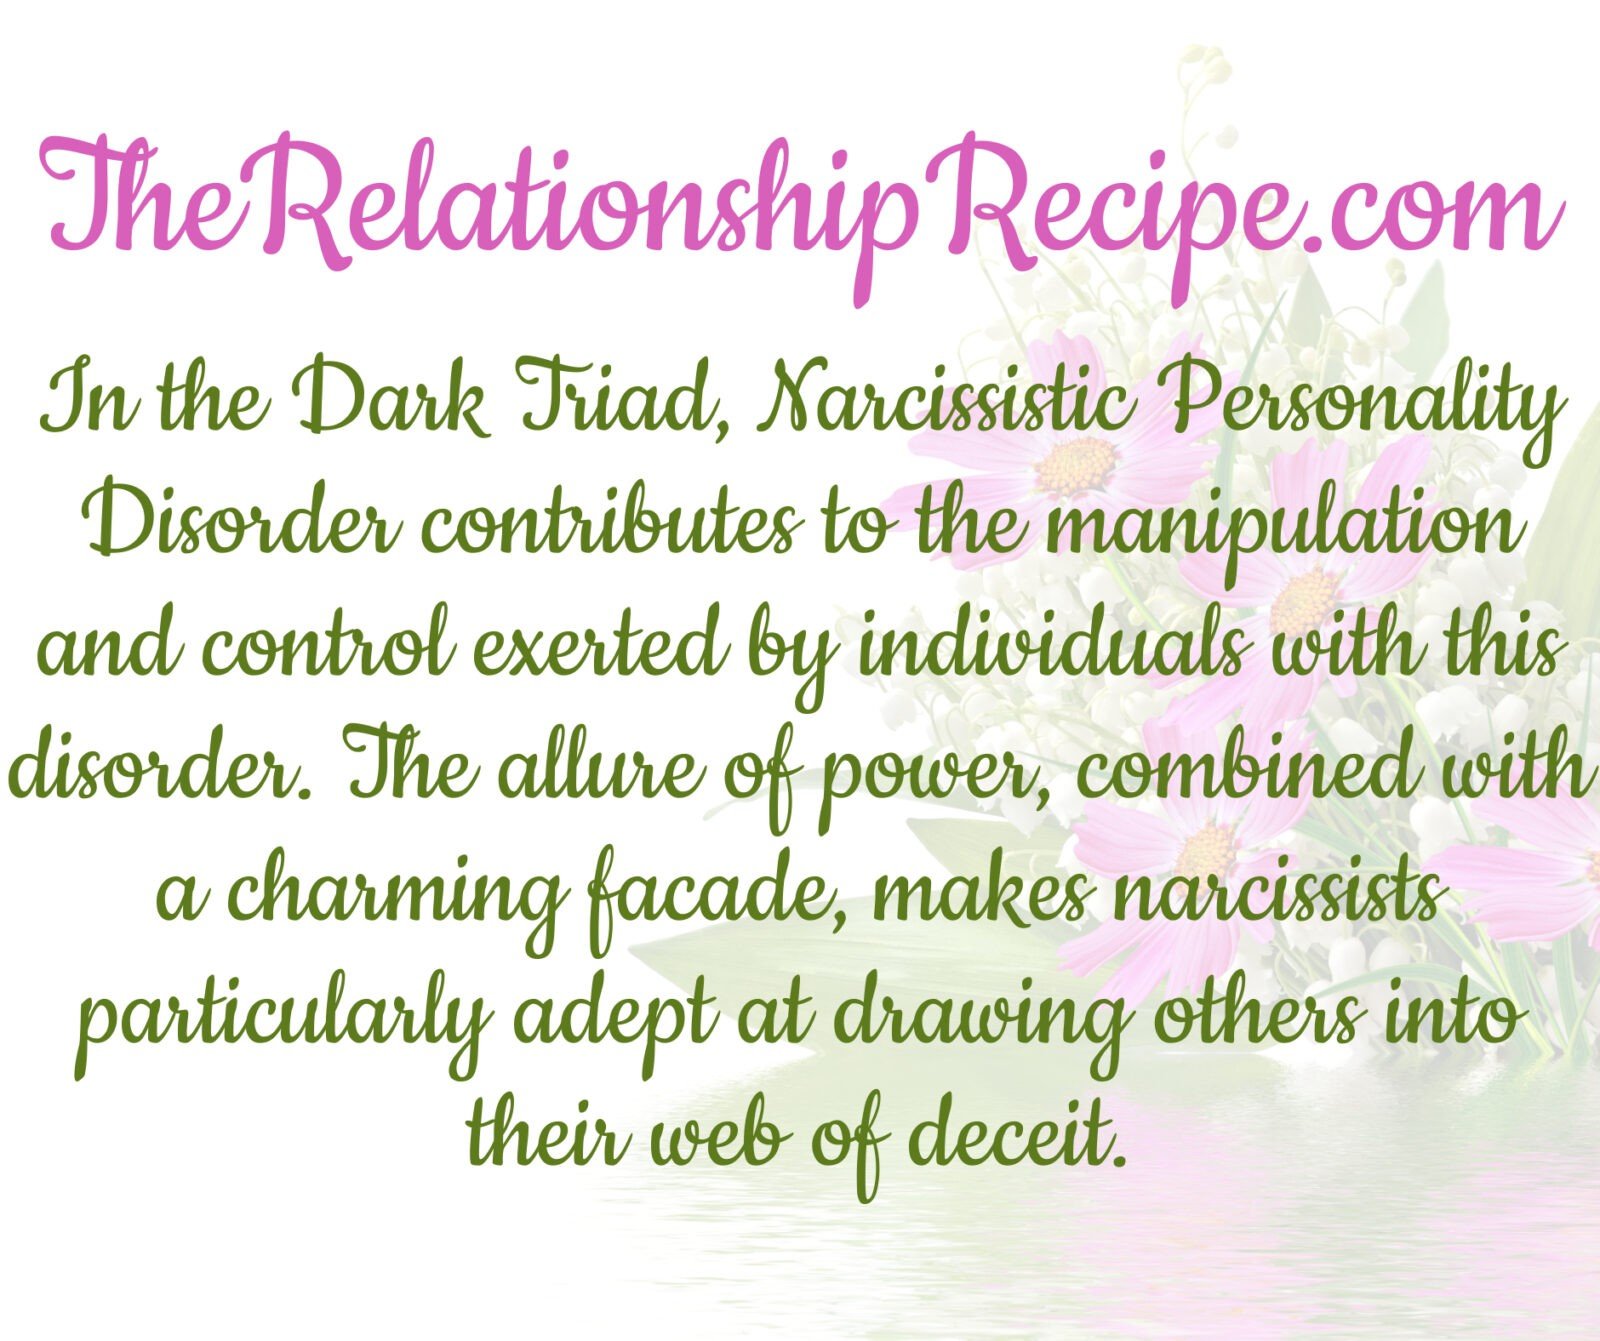 Narcissism, narcissistic personality disorder, and the Dark Triad Meme The Relationship Recipe